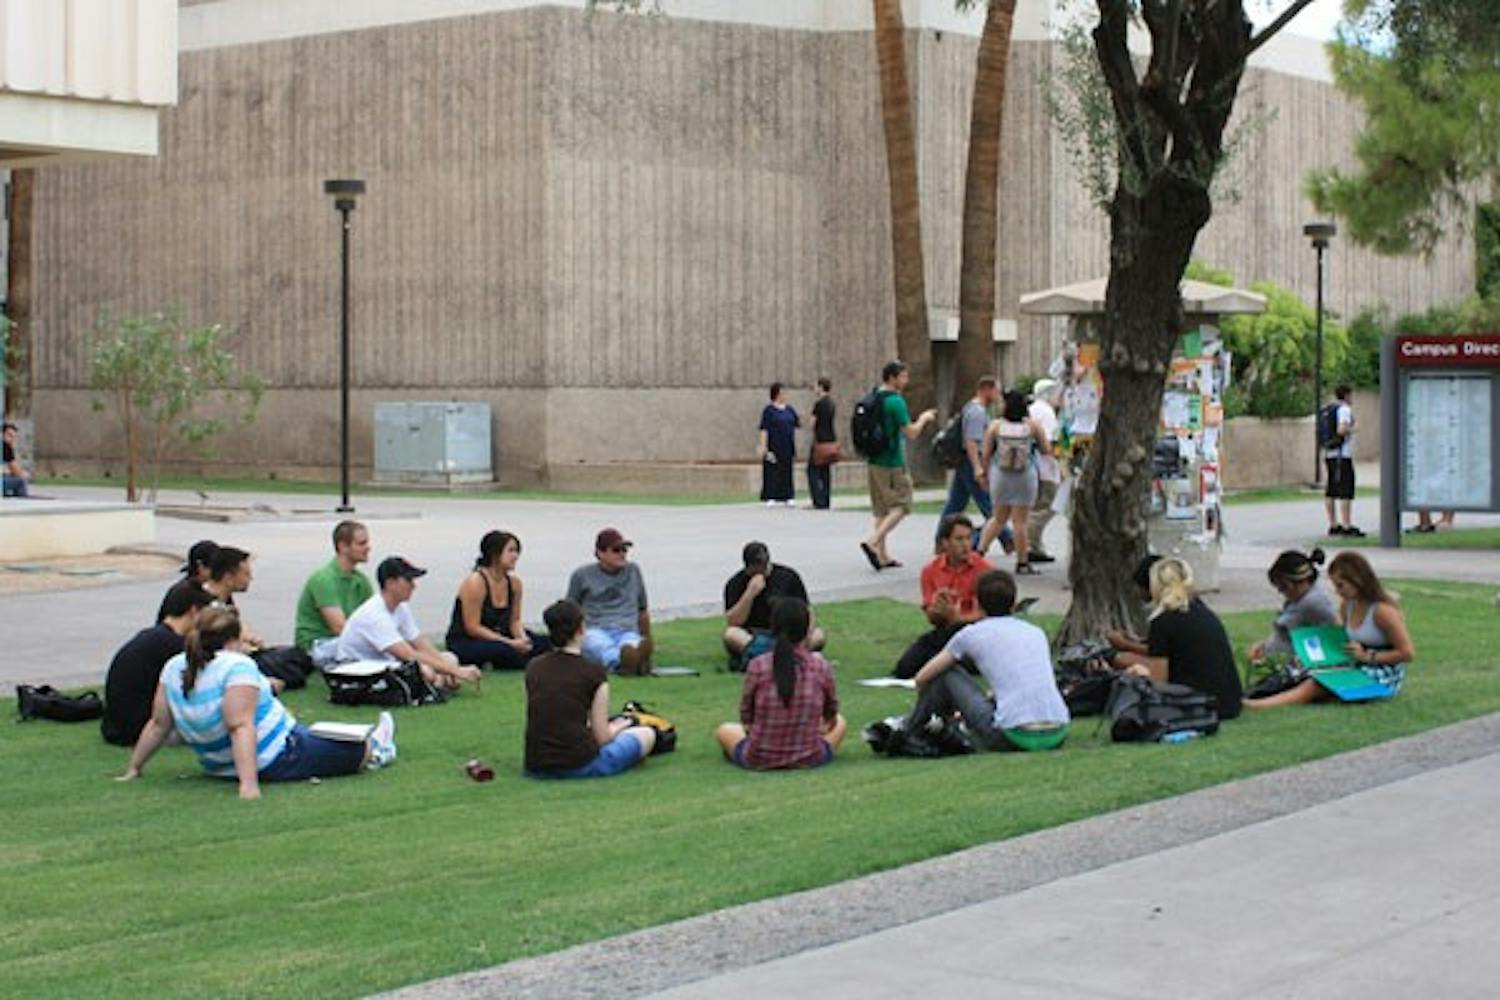 NEXT BEST THING: After being evacuated because of smoke from the Stauffer Communication Arts building on Thursday afternoon, one teacher decides to keep class going on the lawn right outside. (Photo by Jessica Weisel)